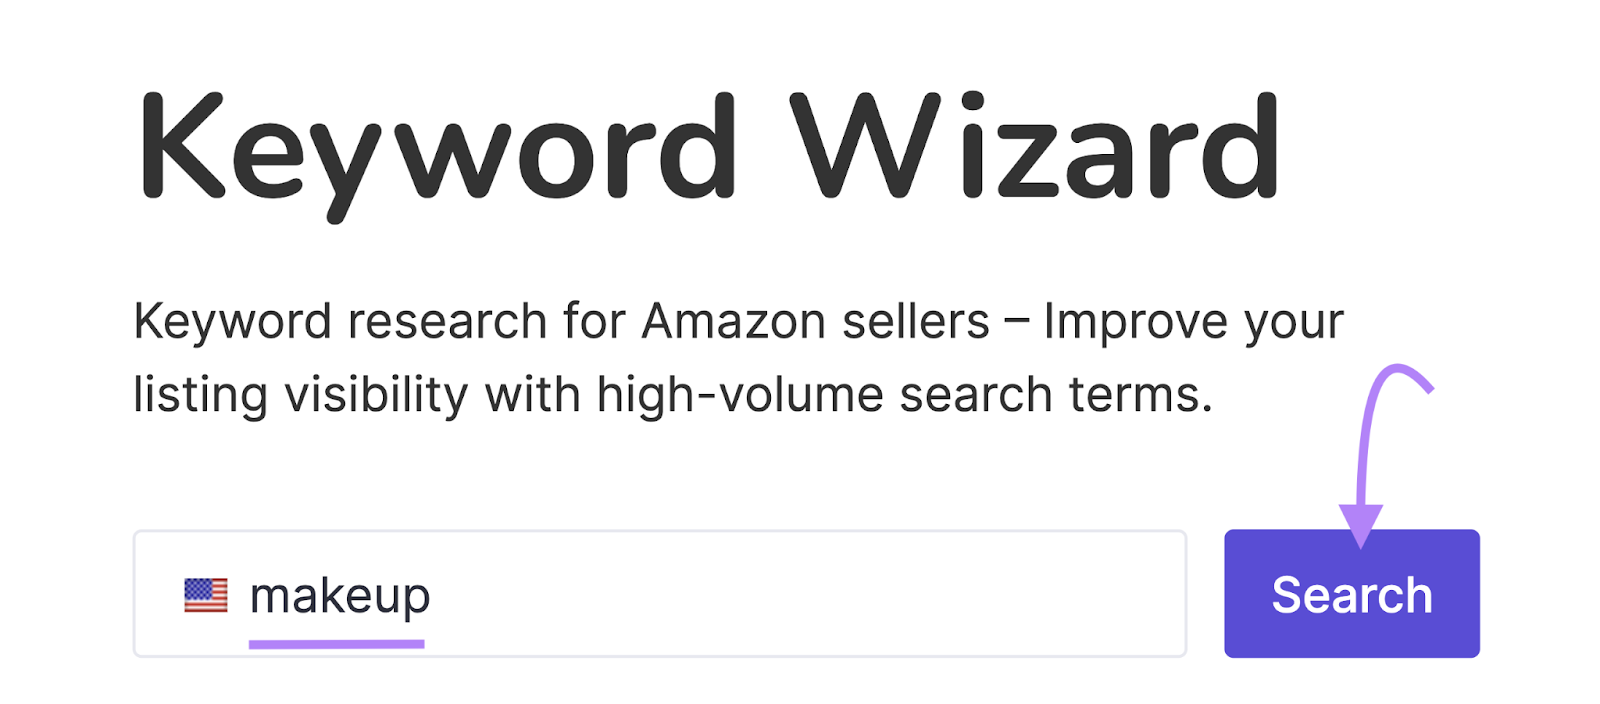 "makeup" entered into the Keyword Wizard for Amazon app search bar